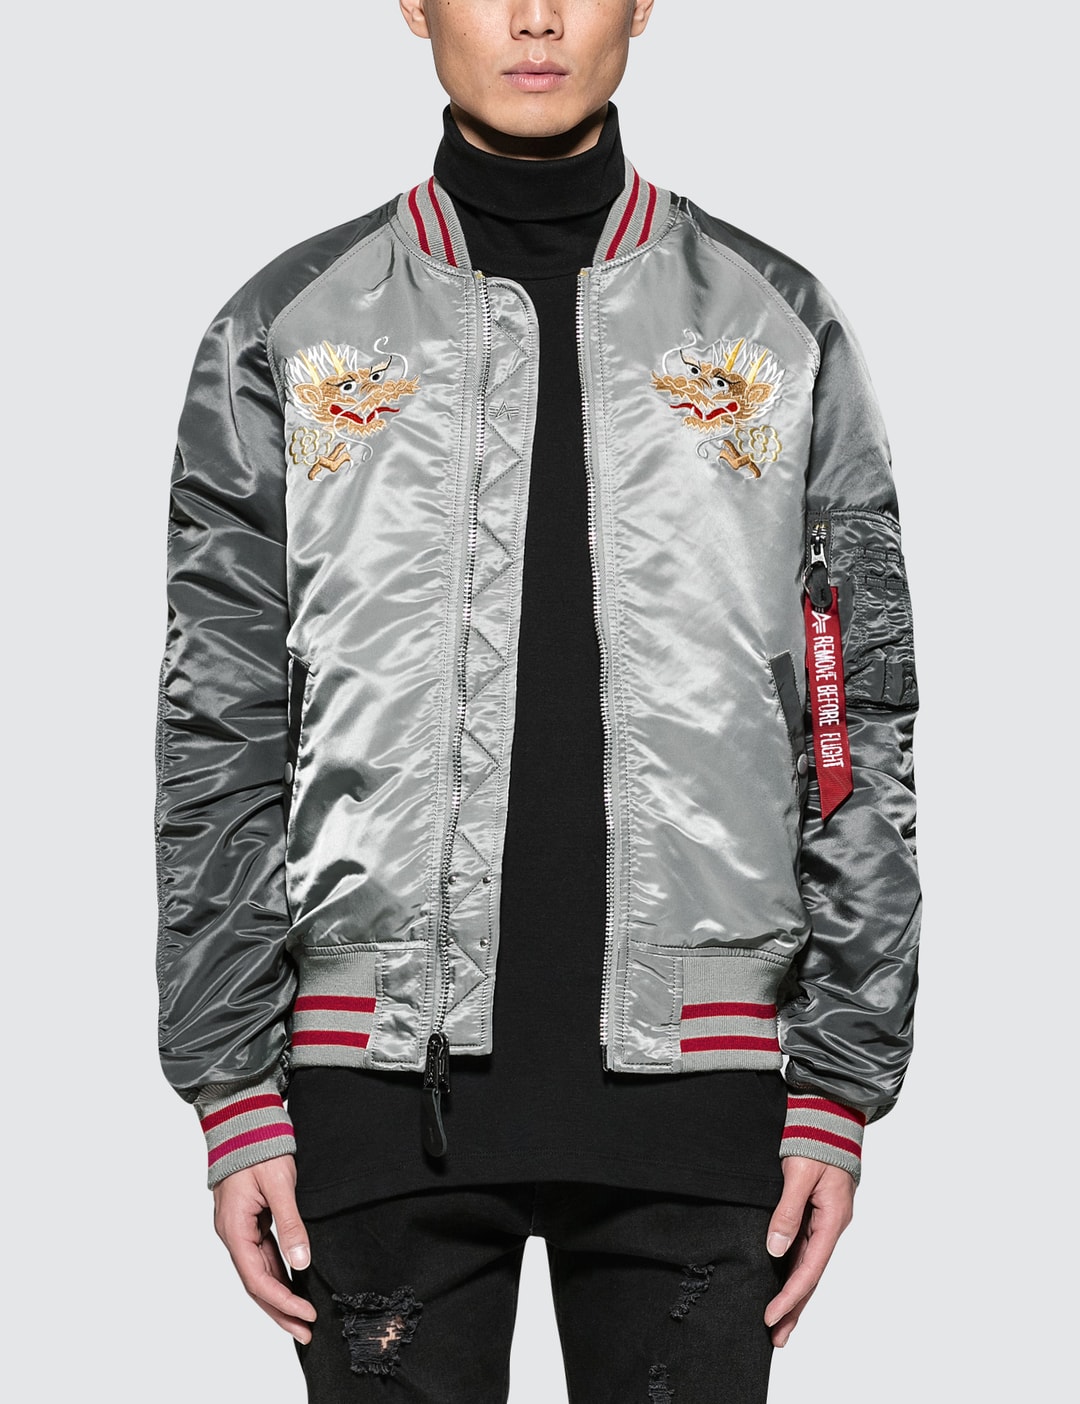 MA-1 Jacket Globally - by Souvenir Lifestyle Alpha Curated | Hypebeast Fashion - and HBX Dragon Double Industries